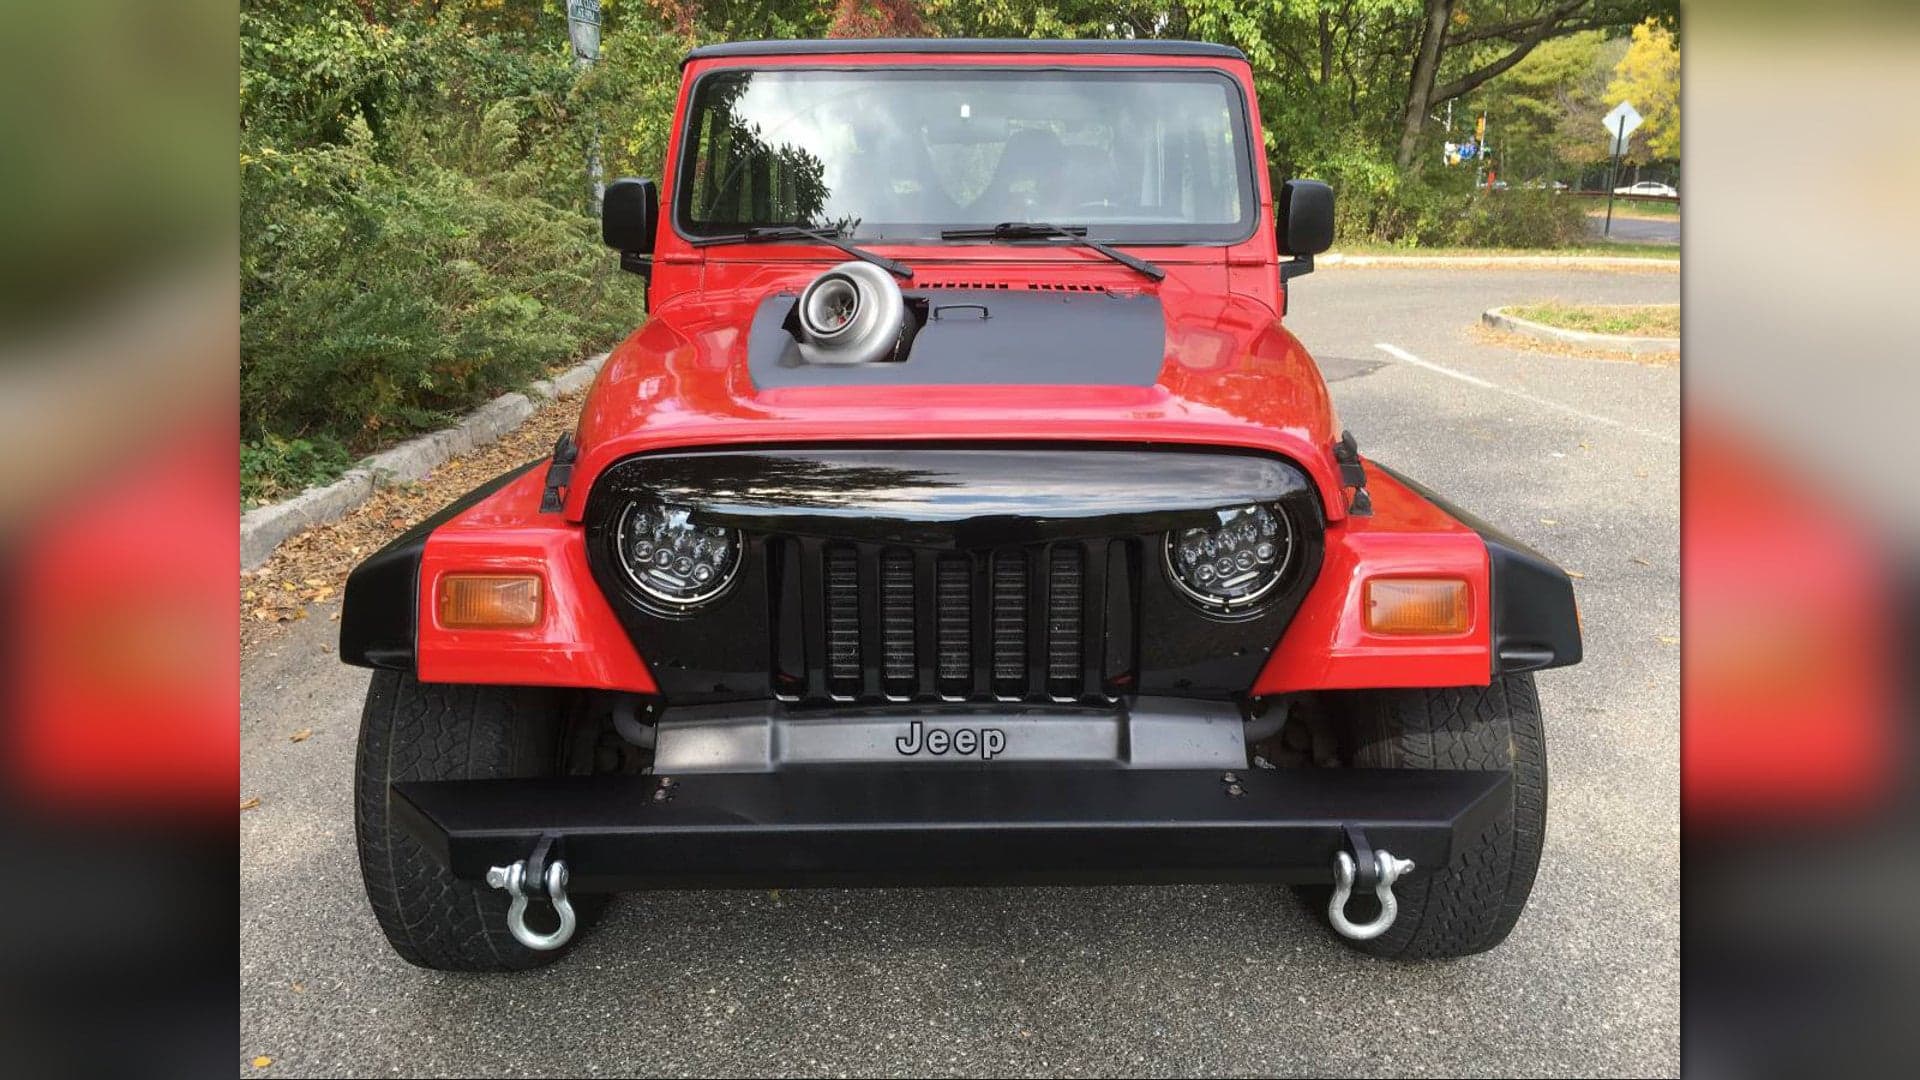 This 2JZ-Swapped Jeep Wrangler on Craigslist Is Unholy in the Best Way